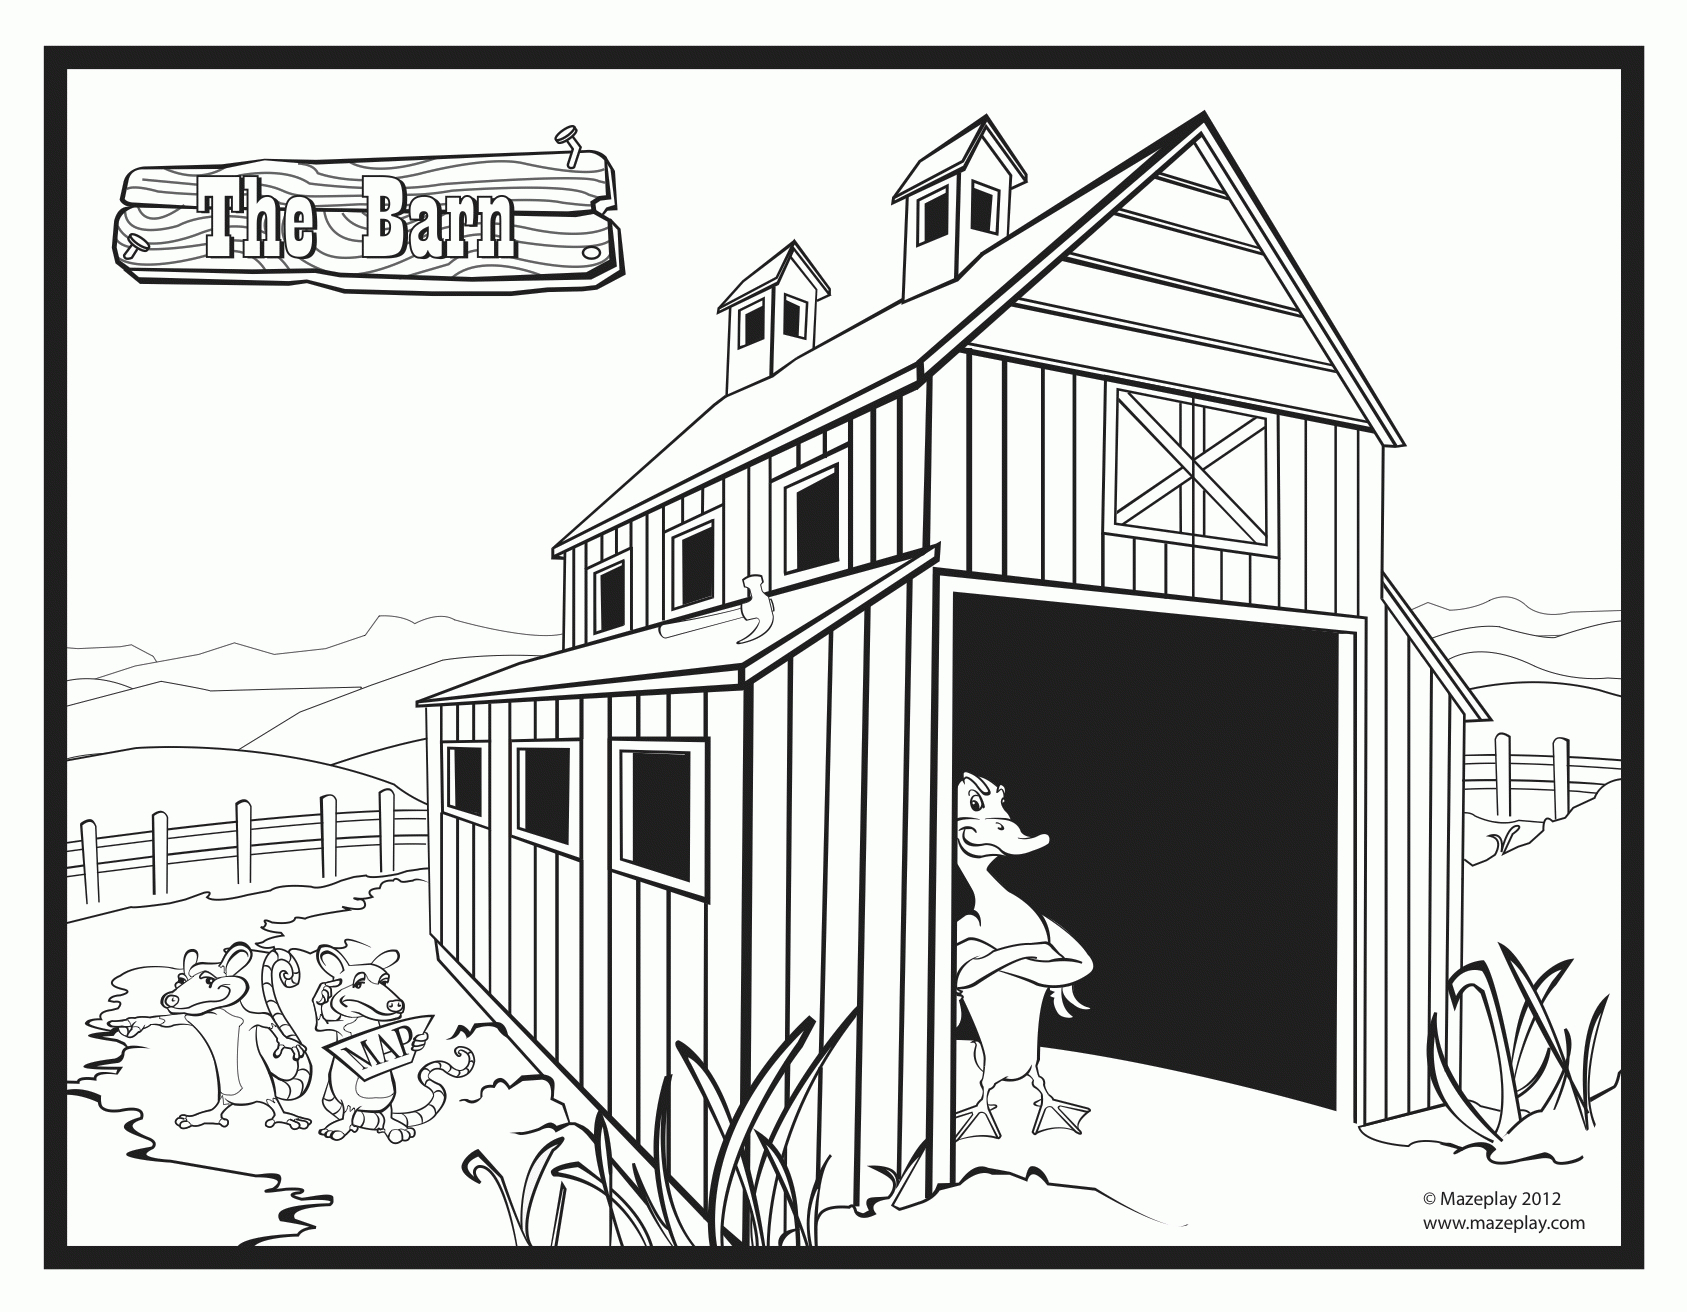 Free Printable Barn Coloring Pages - High Quality Coloring Pages - Free Printable Barn Coloring Pages